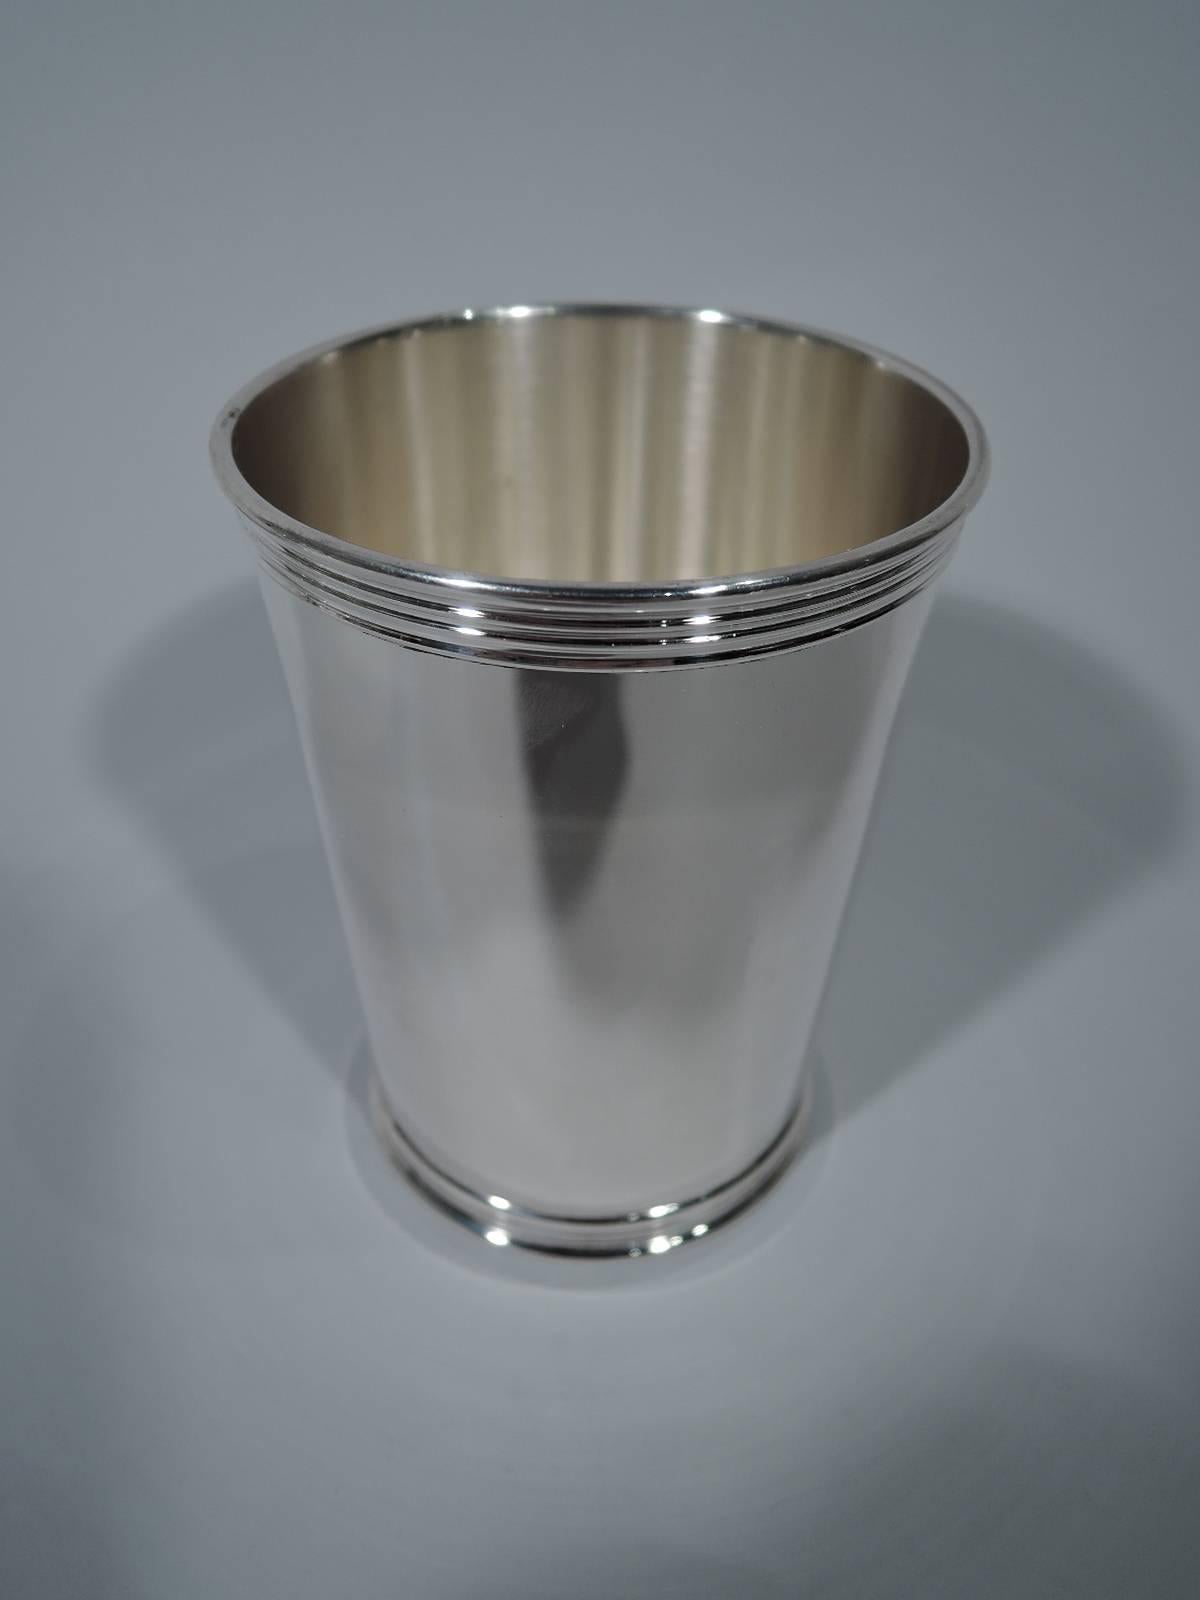 Pair of American sterling silver mint julep cups. Each: Straight and tapering sides and reeded rim and foot. Hallmark includes retailer’s name W. Bell & Co. Total weight: 8.4 troy ounces.